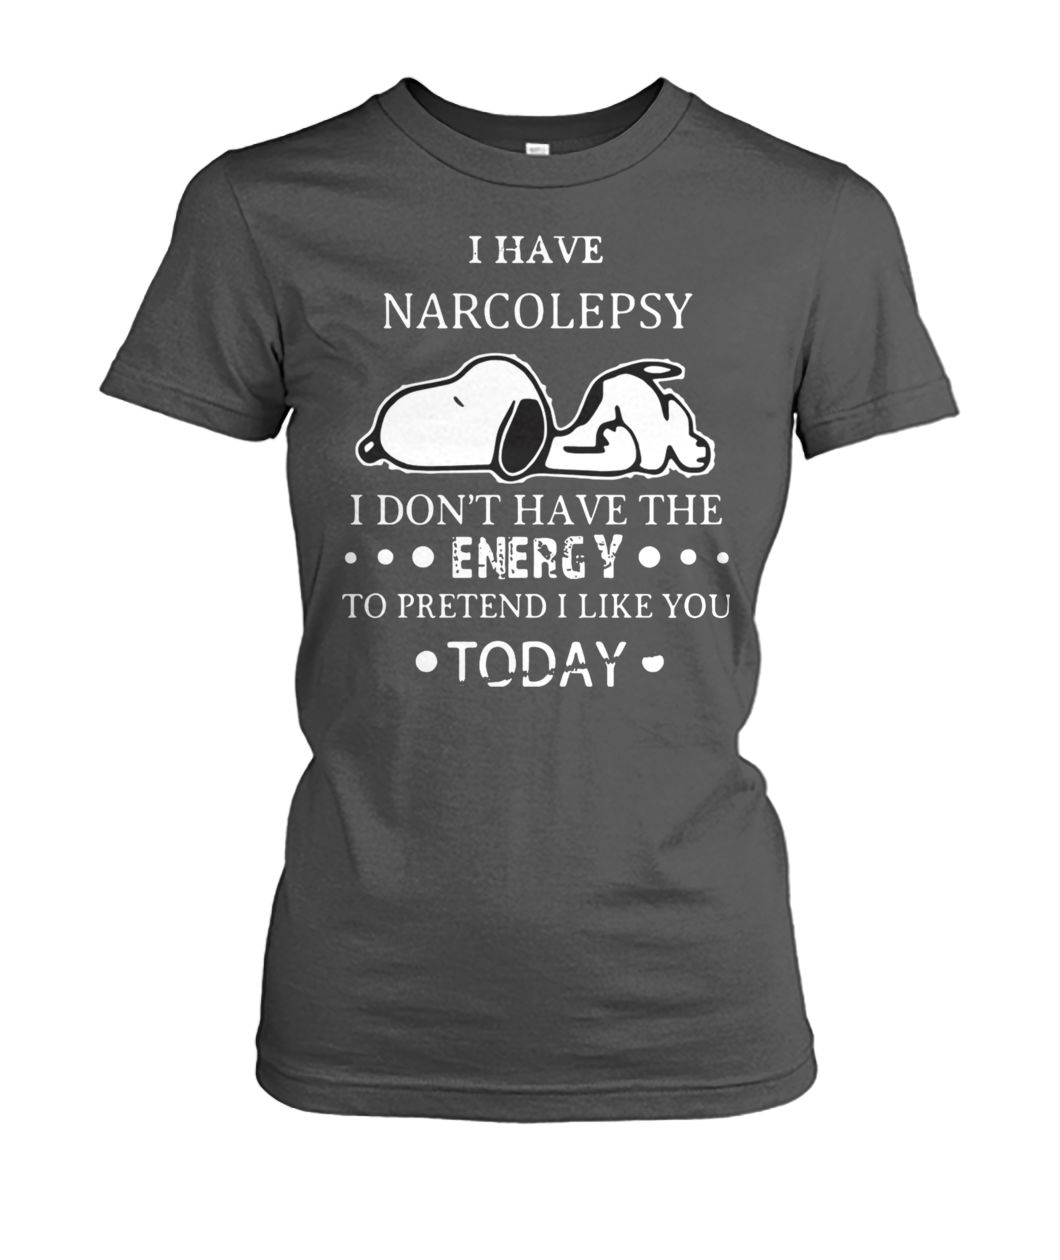 Snoopy I have narcolepsy I don't have the energy to pretend I like you today women's crew tee